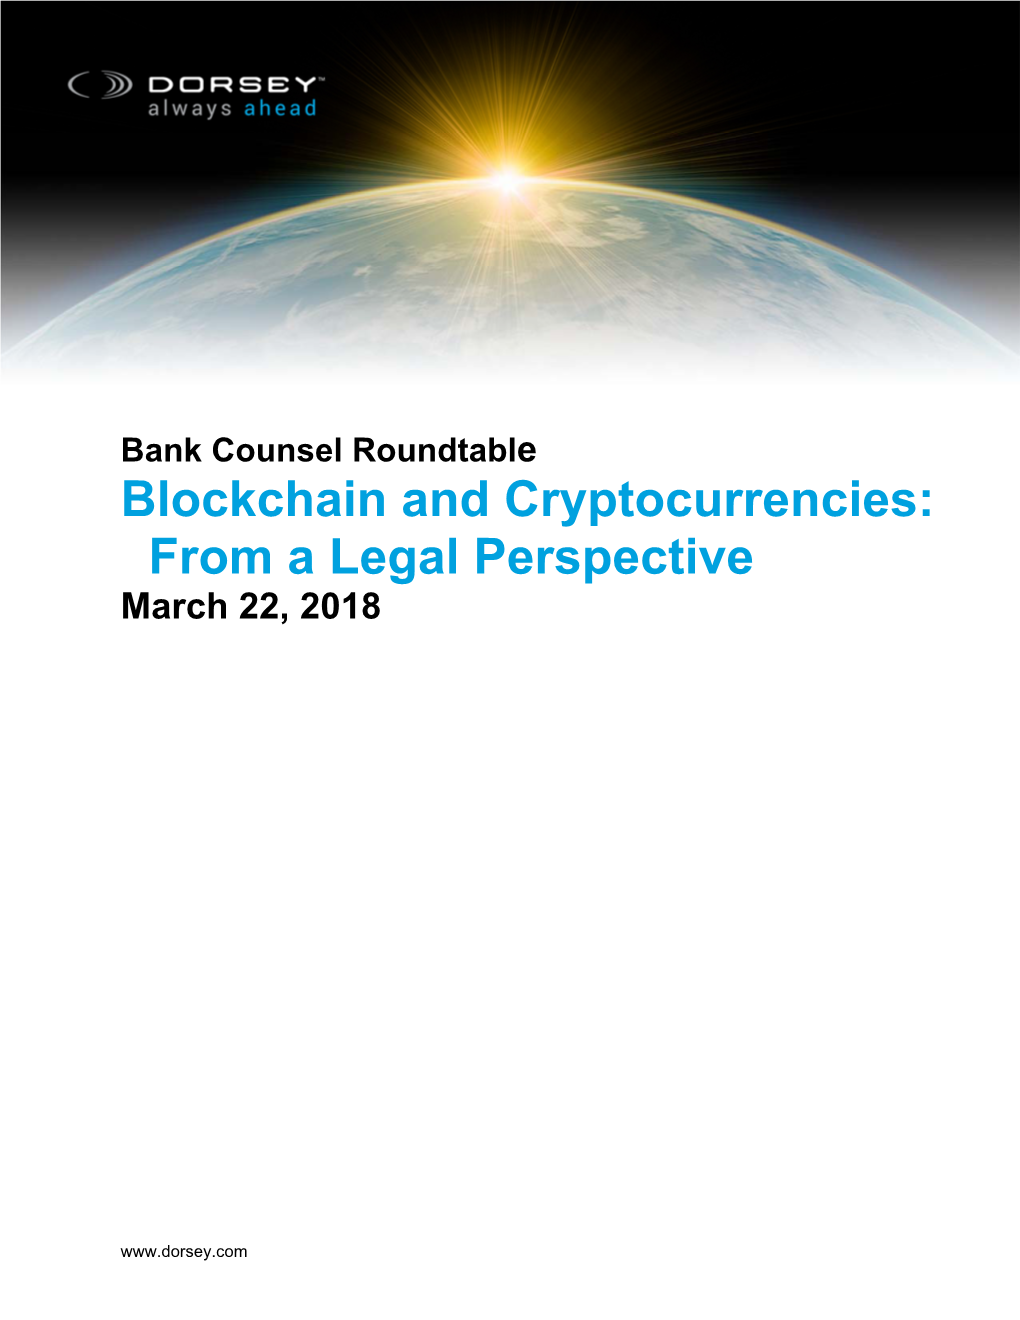 Blockchain and Cryptocurrencies: from a Legal Perspective March 22, 2018